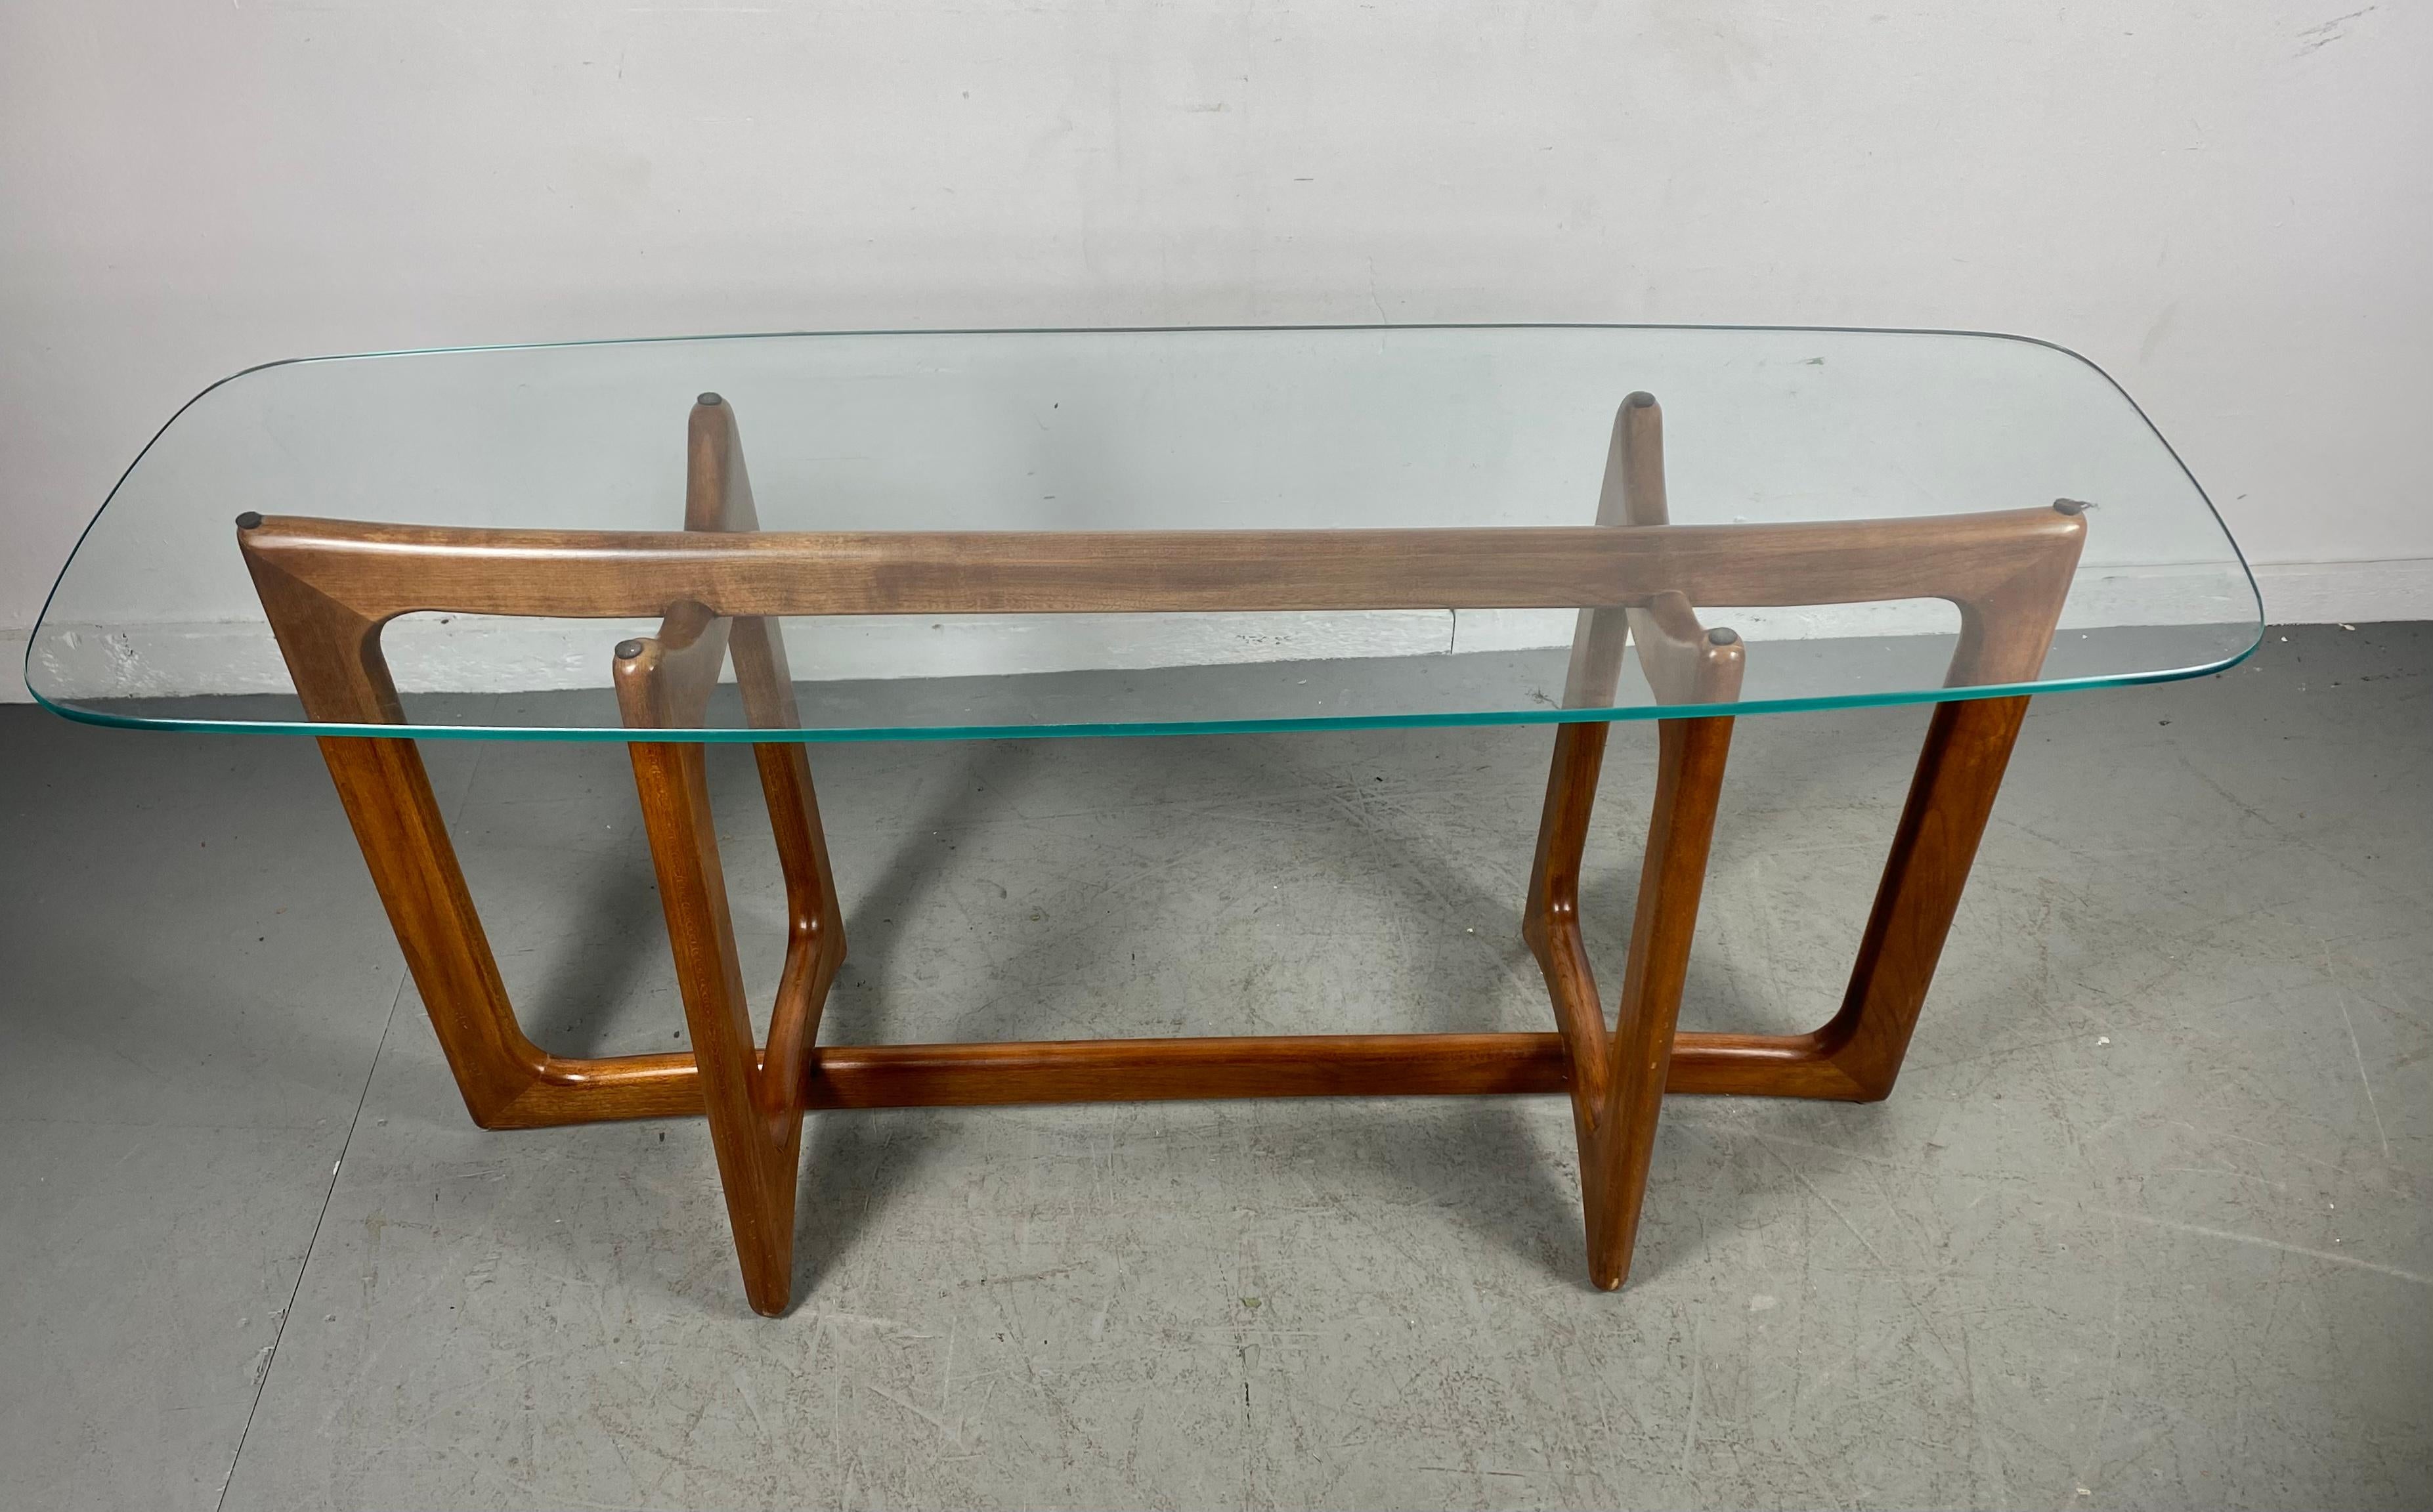 Seldom Seen sculptural walnut and glass console table designed by Adrian Pearsall classic Mid-Century Modern design excellent original condition. Would enhance any modern, contemporary, eclectic environment, hand delivery avail to New York City or